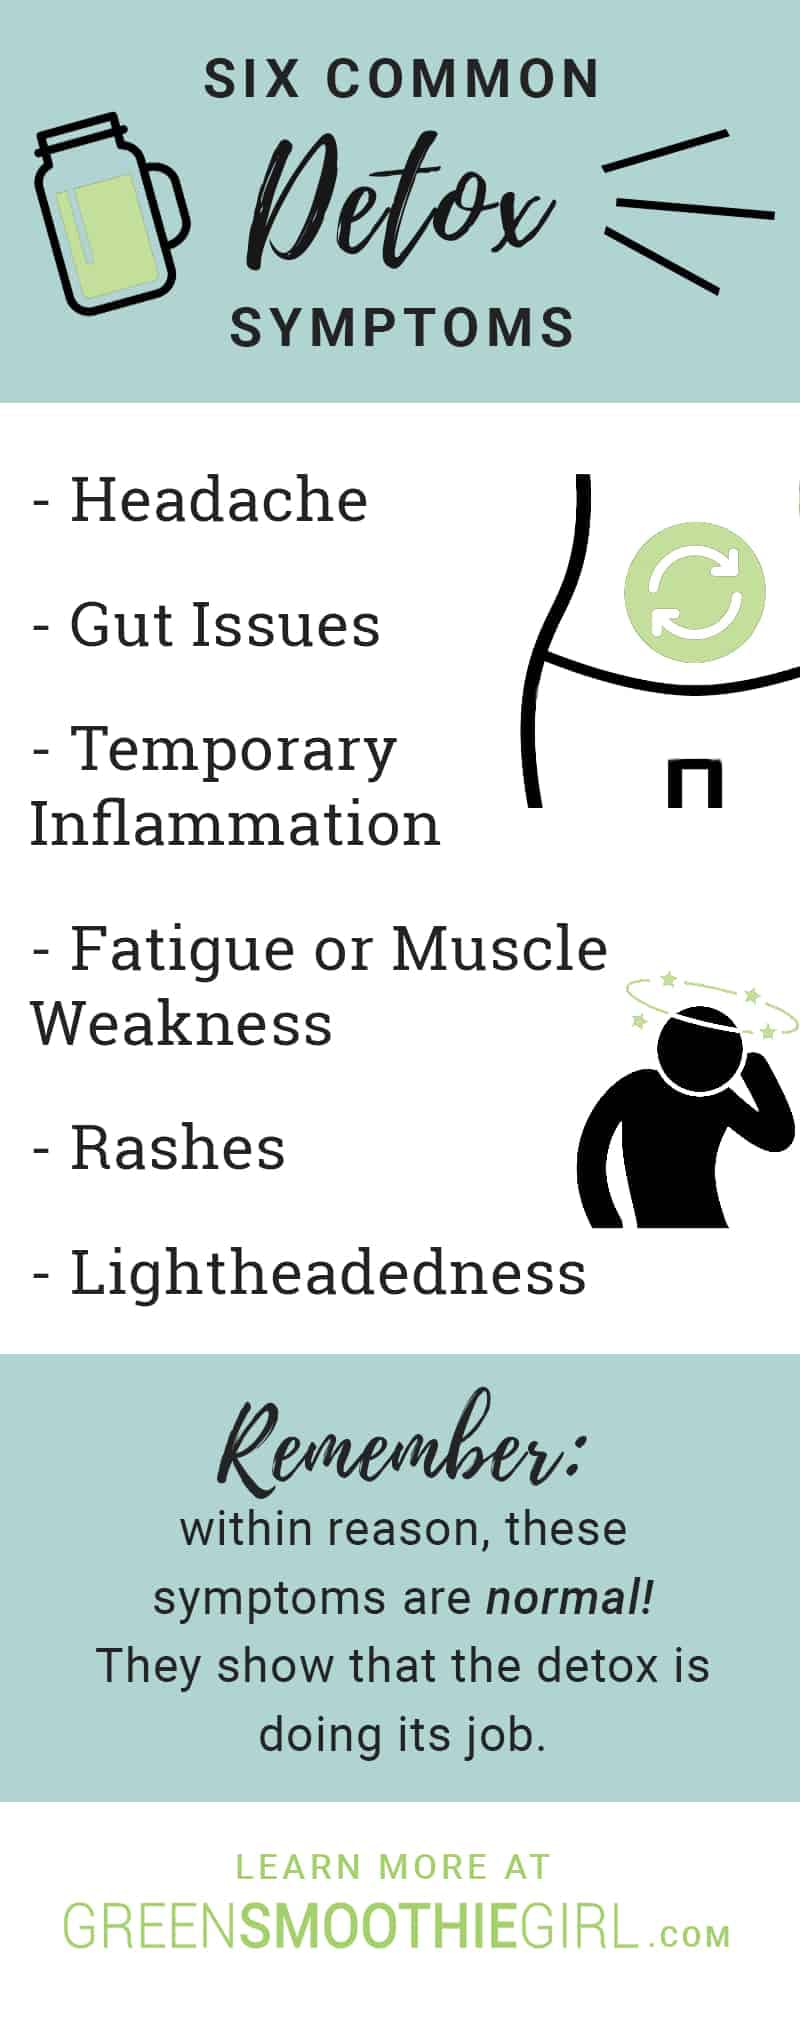 Six Common Detox Symptoms | Herxheimer Reaction: What Is It, How Do I Clear It?